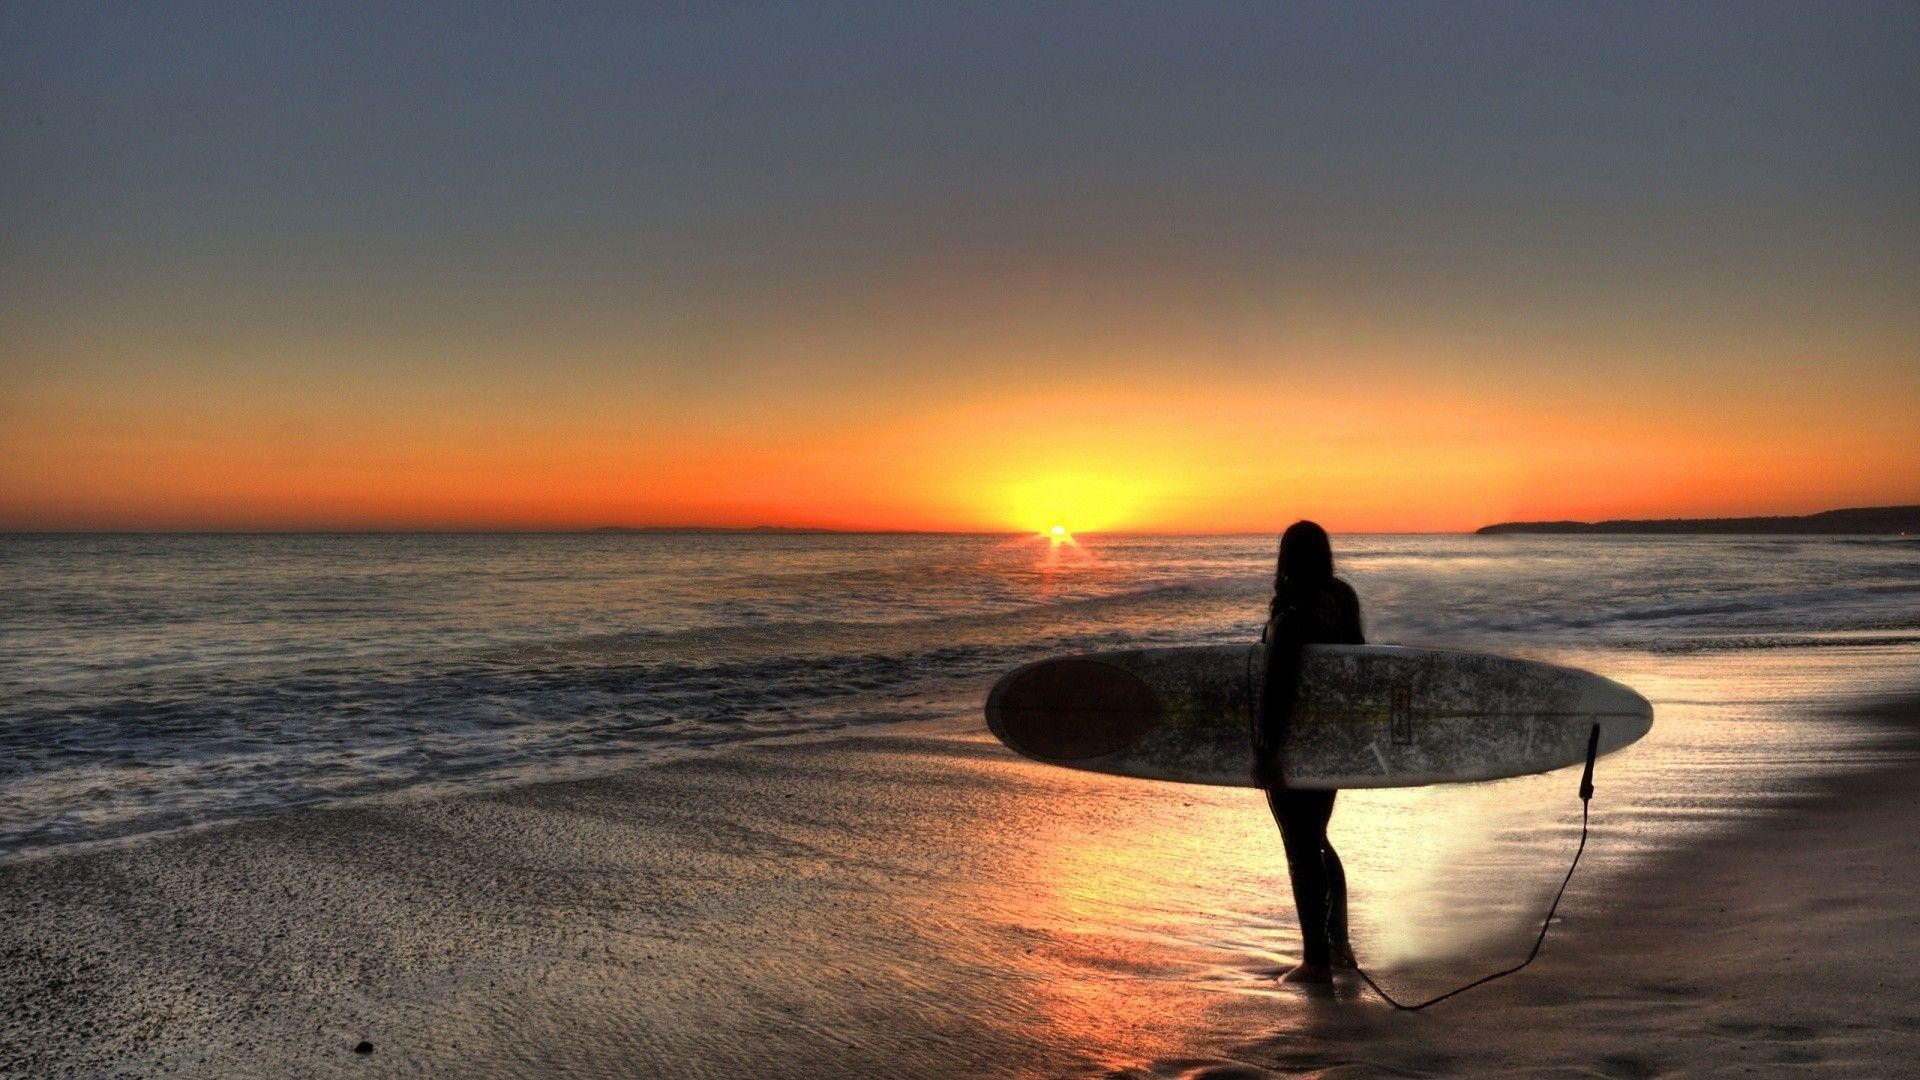 1920x1080 Sunset Beach Surfing Wallpapers Top Free Sunset Beach Surfing Backgrounds